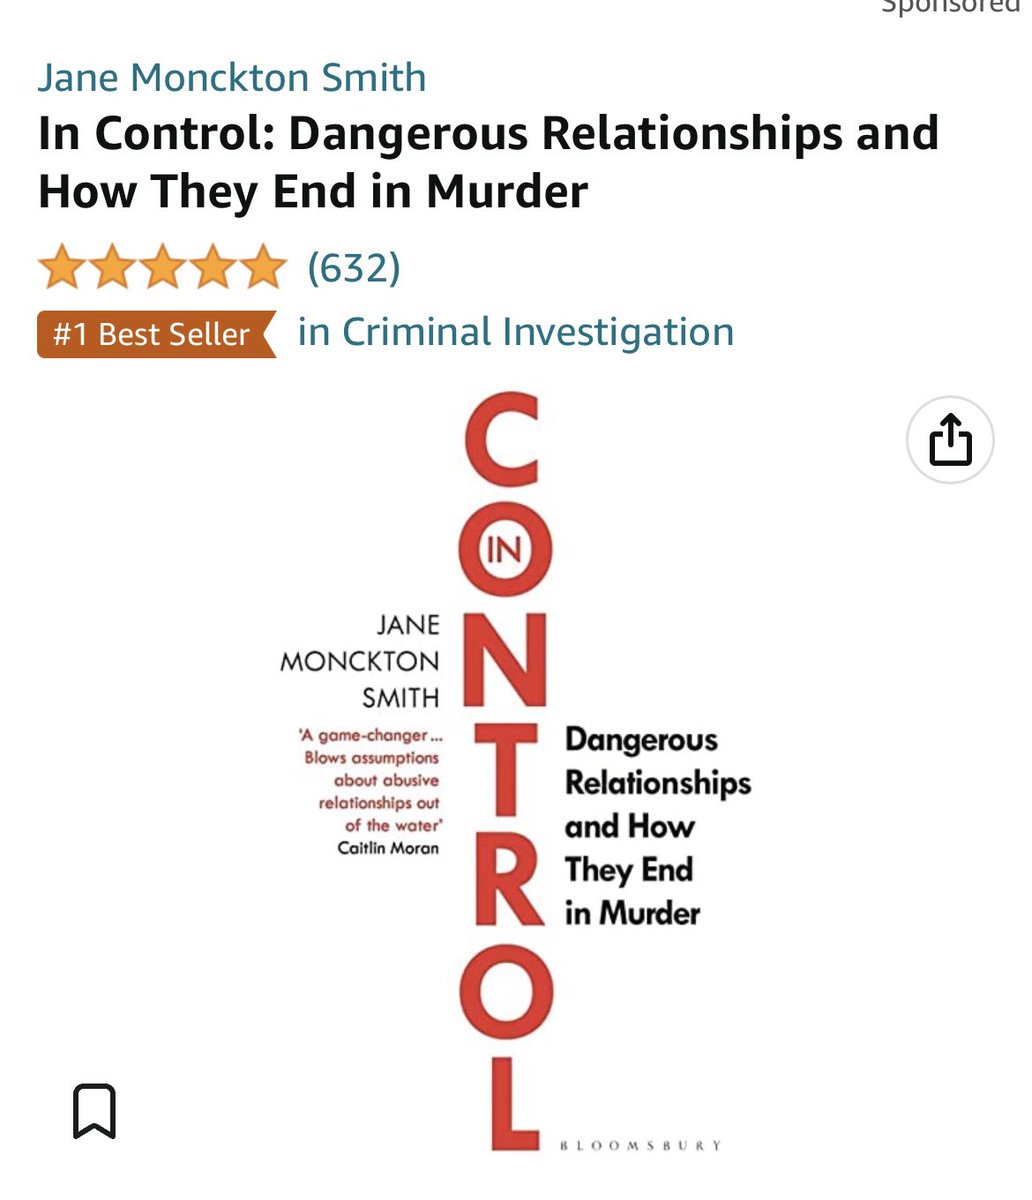 In Control is best seller today in Criminal Investigation 🎉🎉🤩